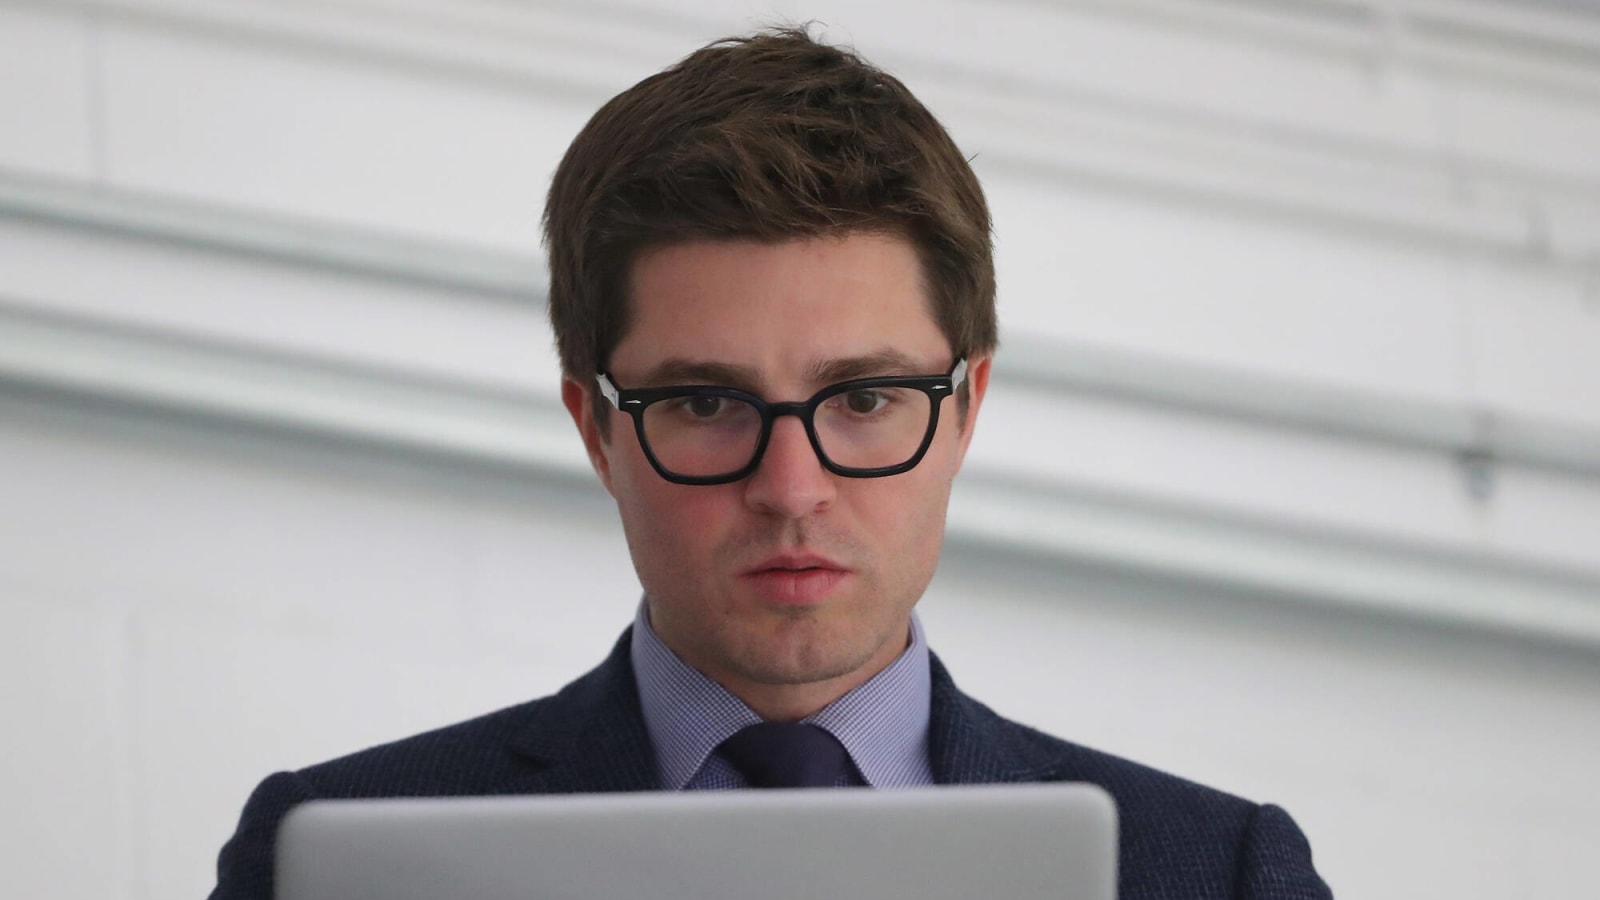 Maybe it wasn't the Maple Leafs' choice about Kyle Dubas after all